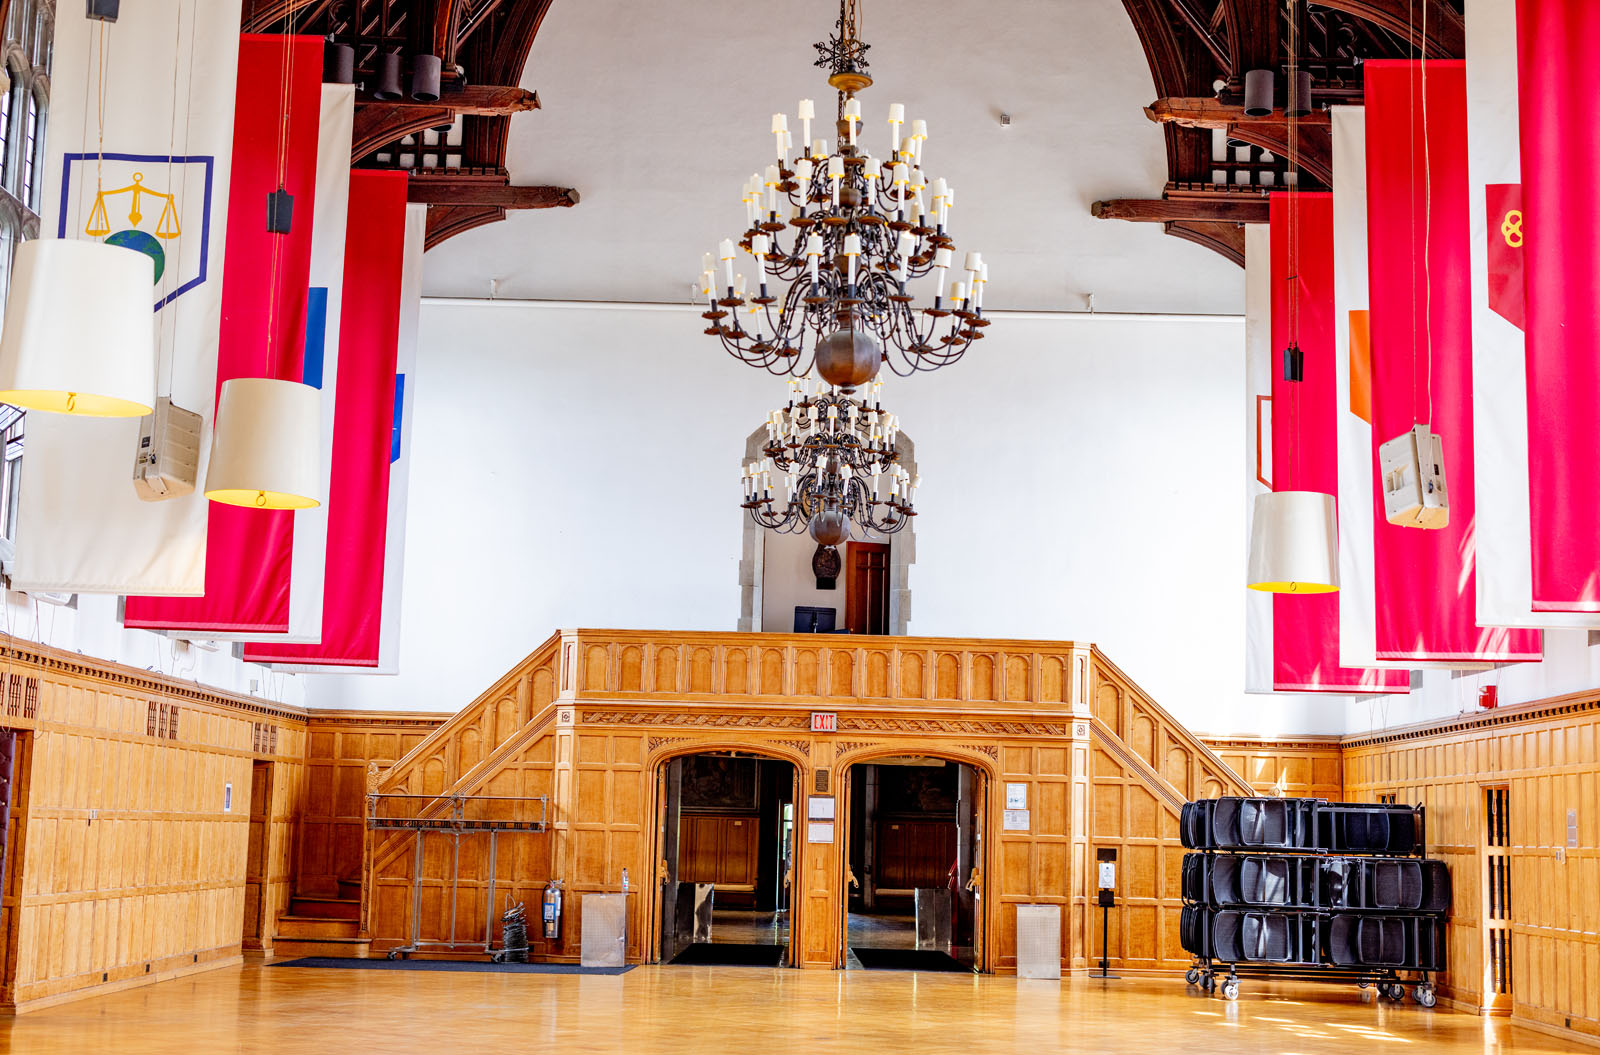 Interior view of the open space within Willard Straight Hall.